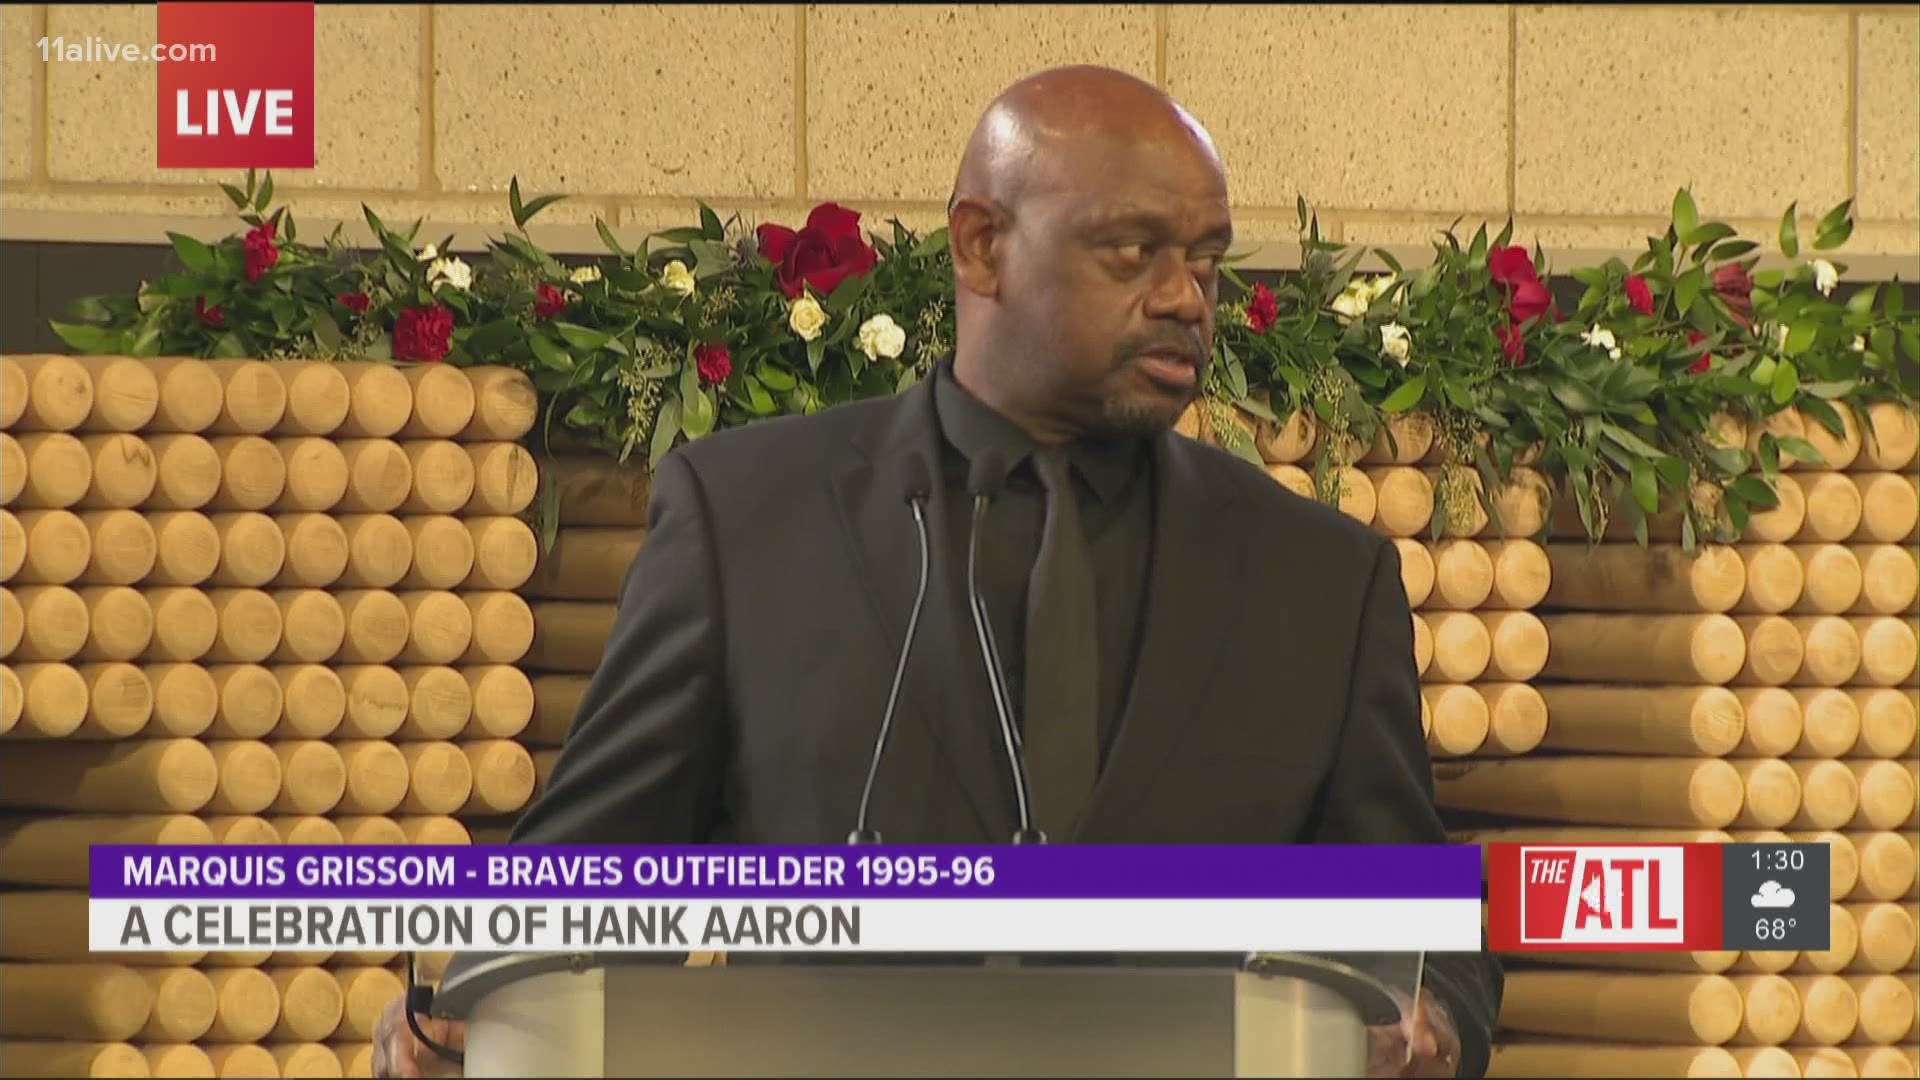 He spoke about Aaron during the memorial service at Truist Park.